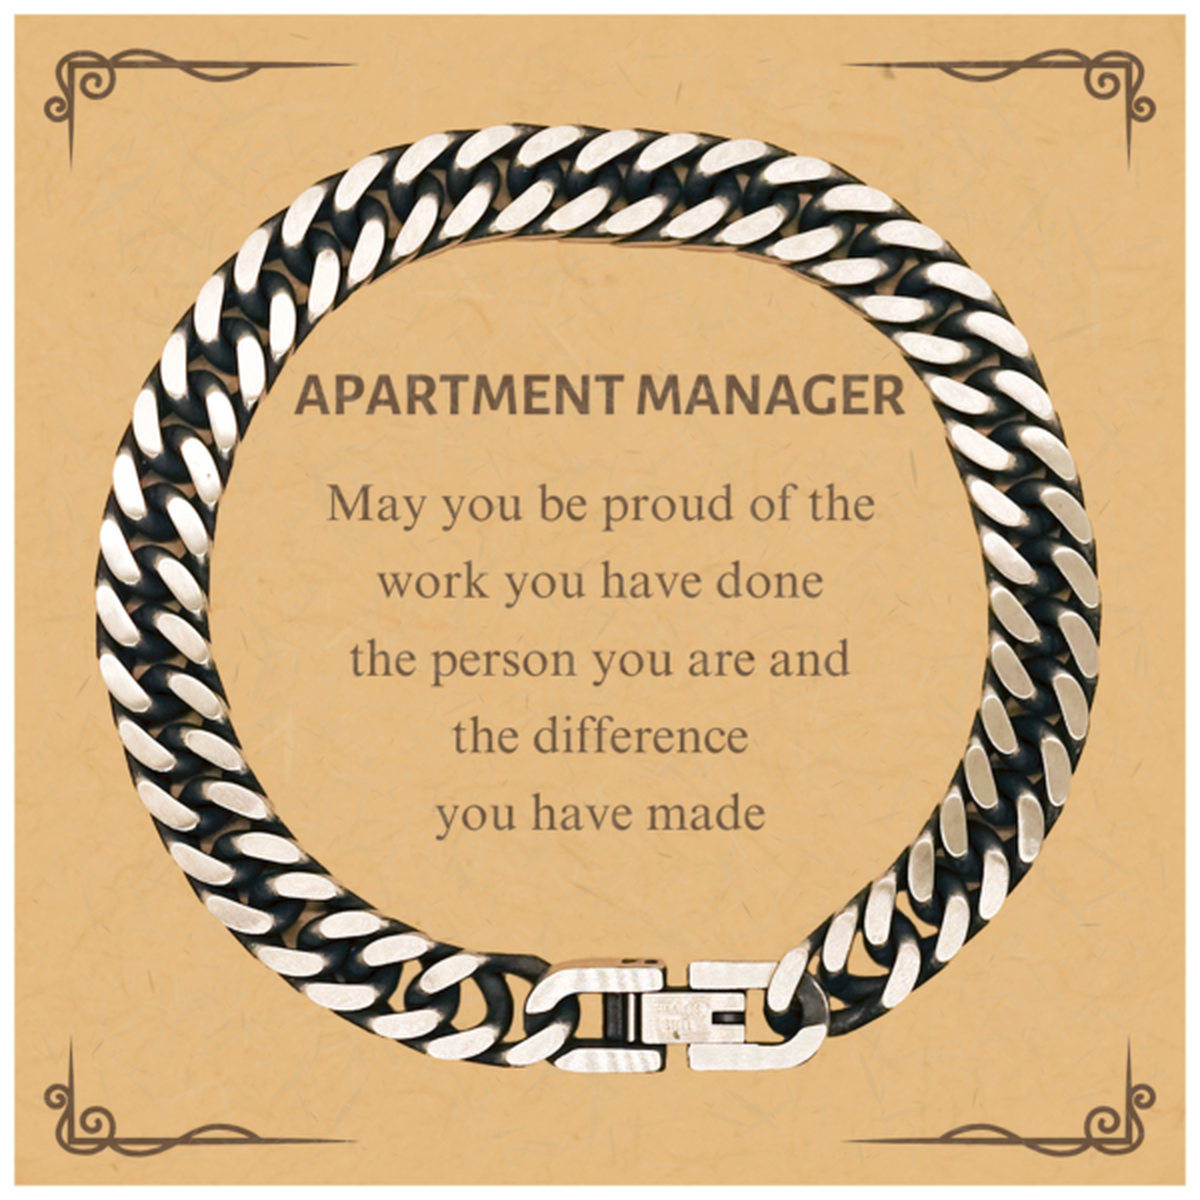 Apartment Manager May you be proud of the work you have done, Retirement Apartment Manager Cuban Link Chain Bracelet for Colleague Appreciation Gifts Amazing for Apartment Manager